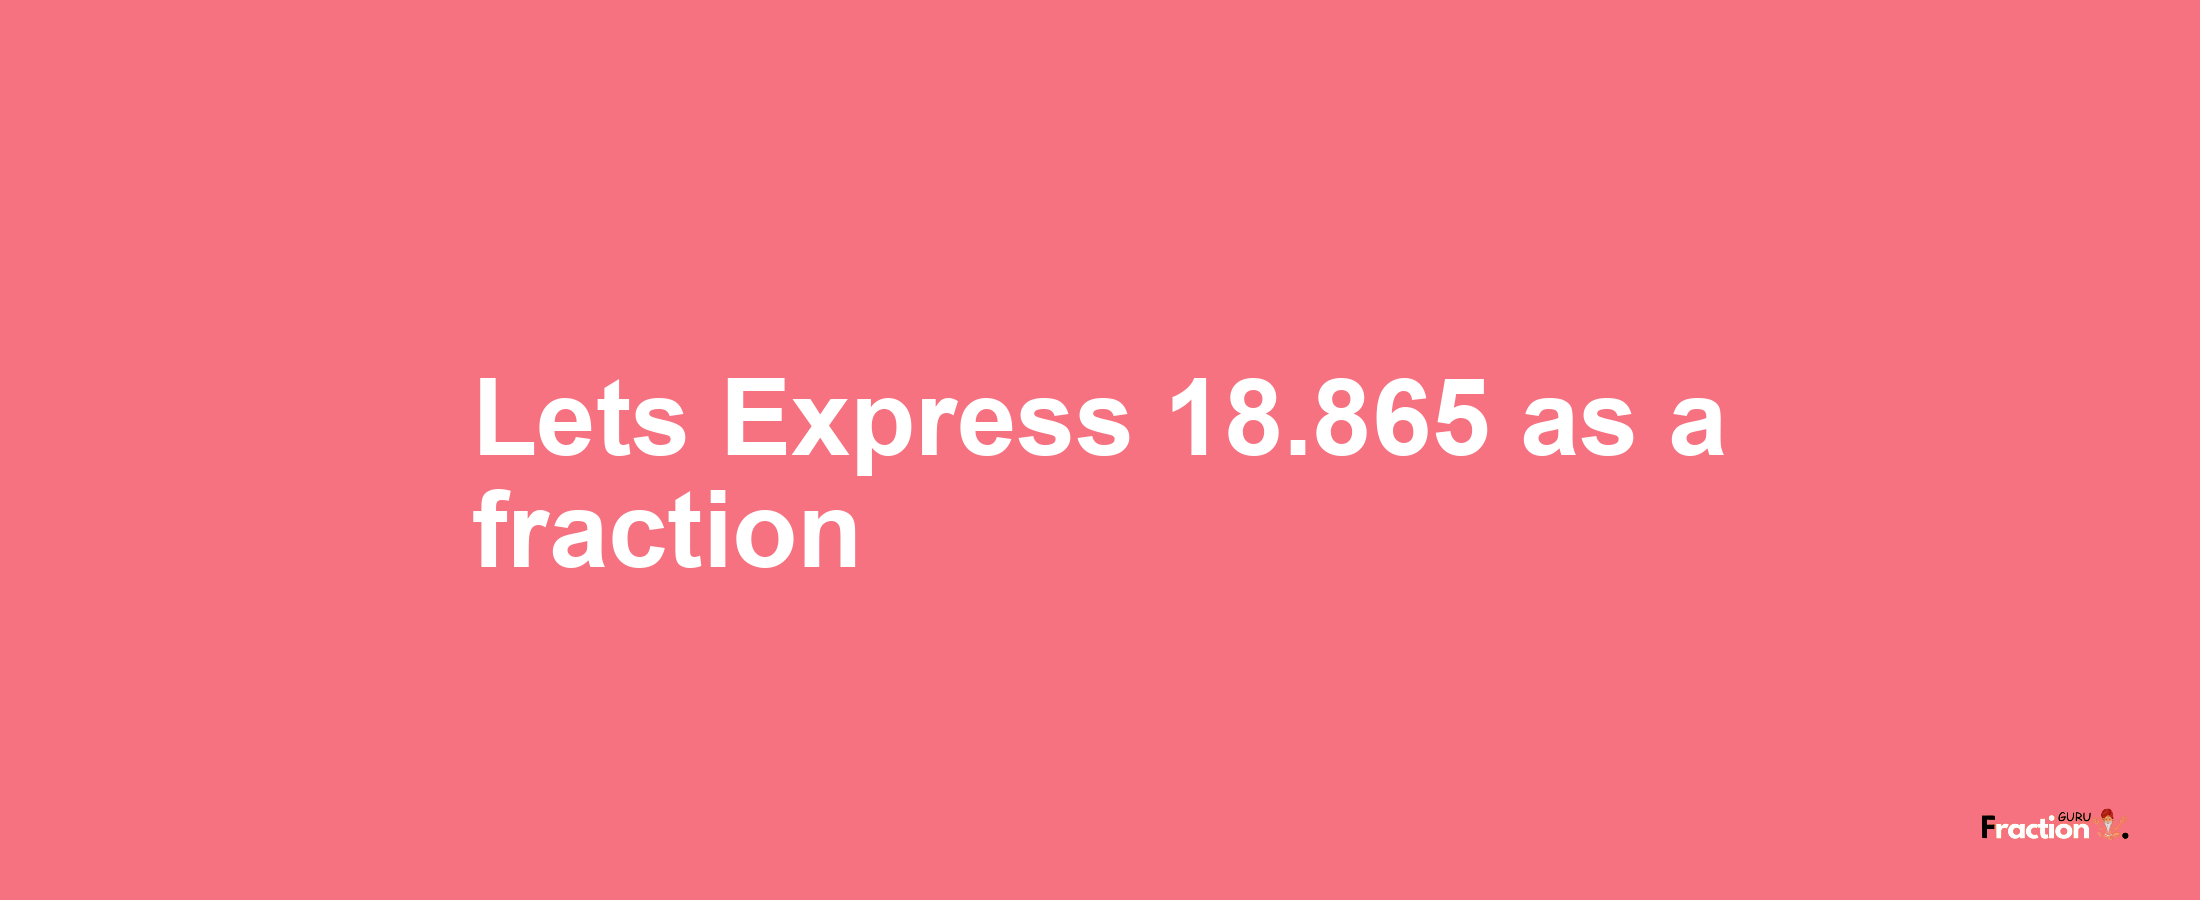 Lets Express 18.865 as afraction